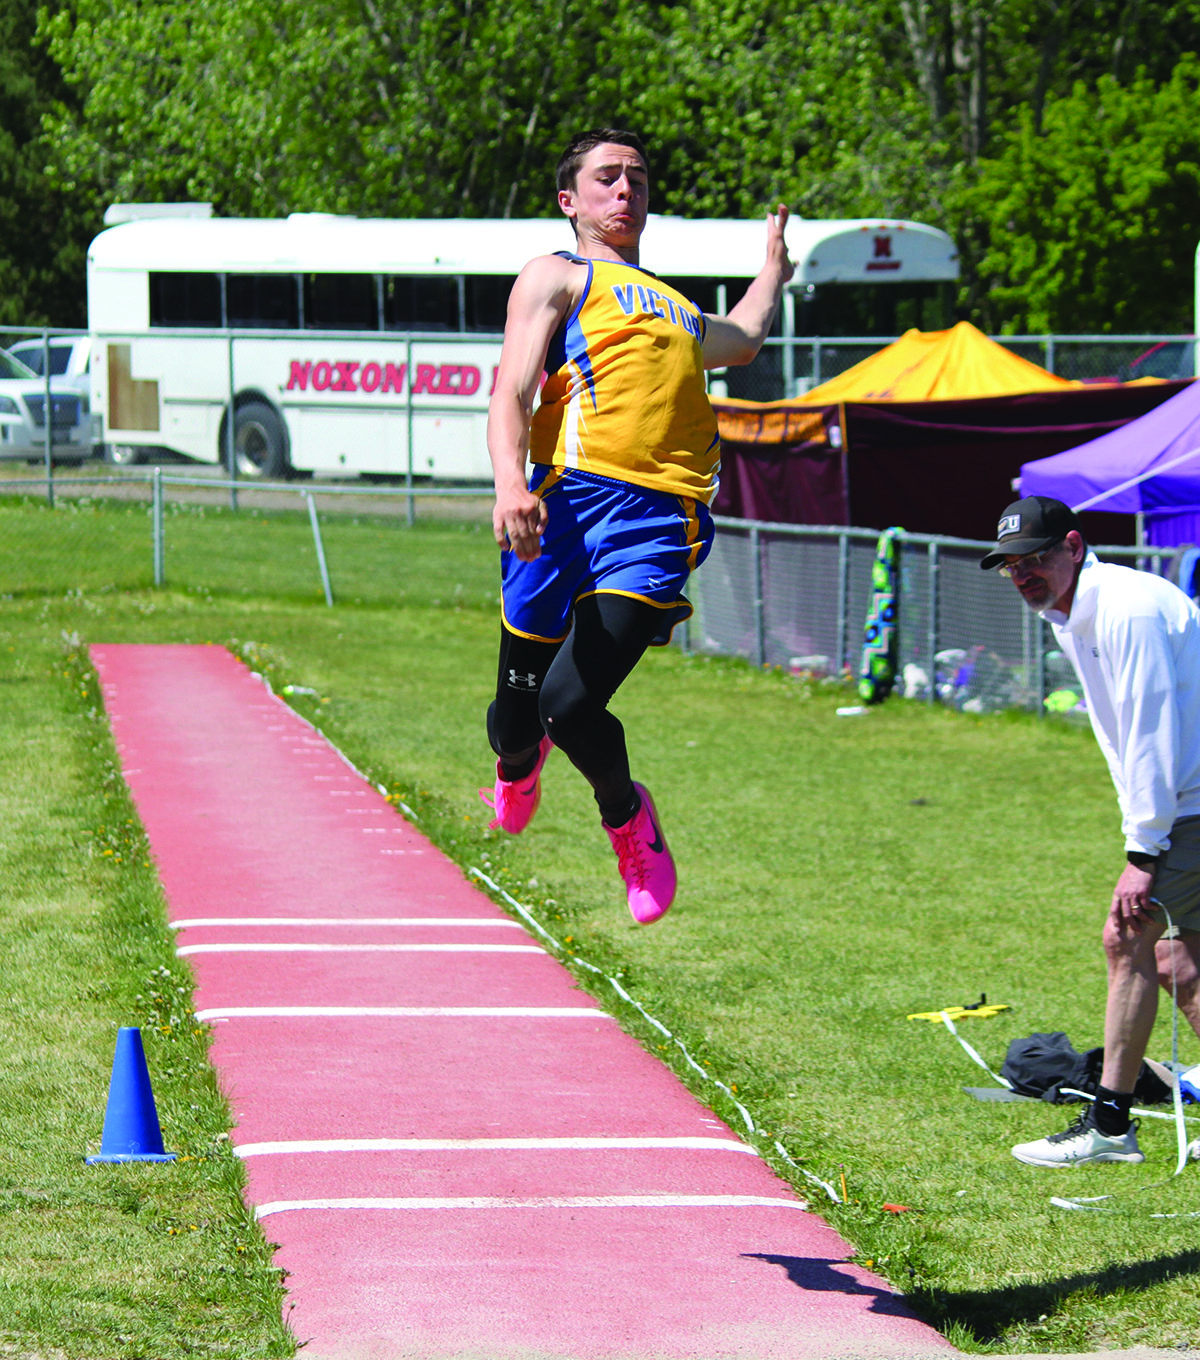 Valley athletes excel at districts - Bitterroot Star